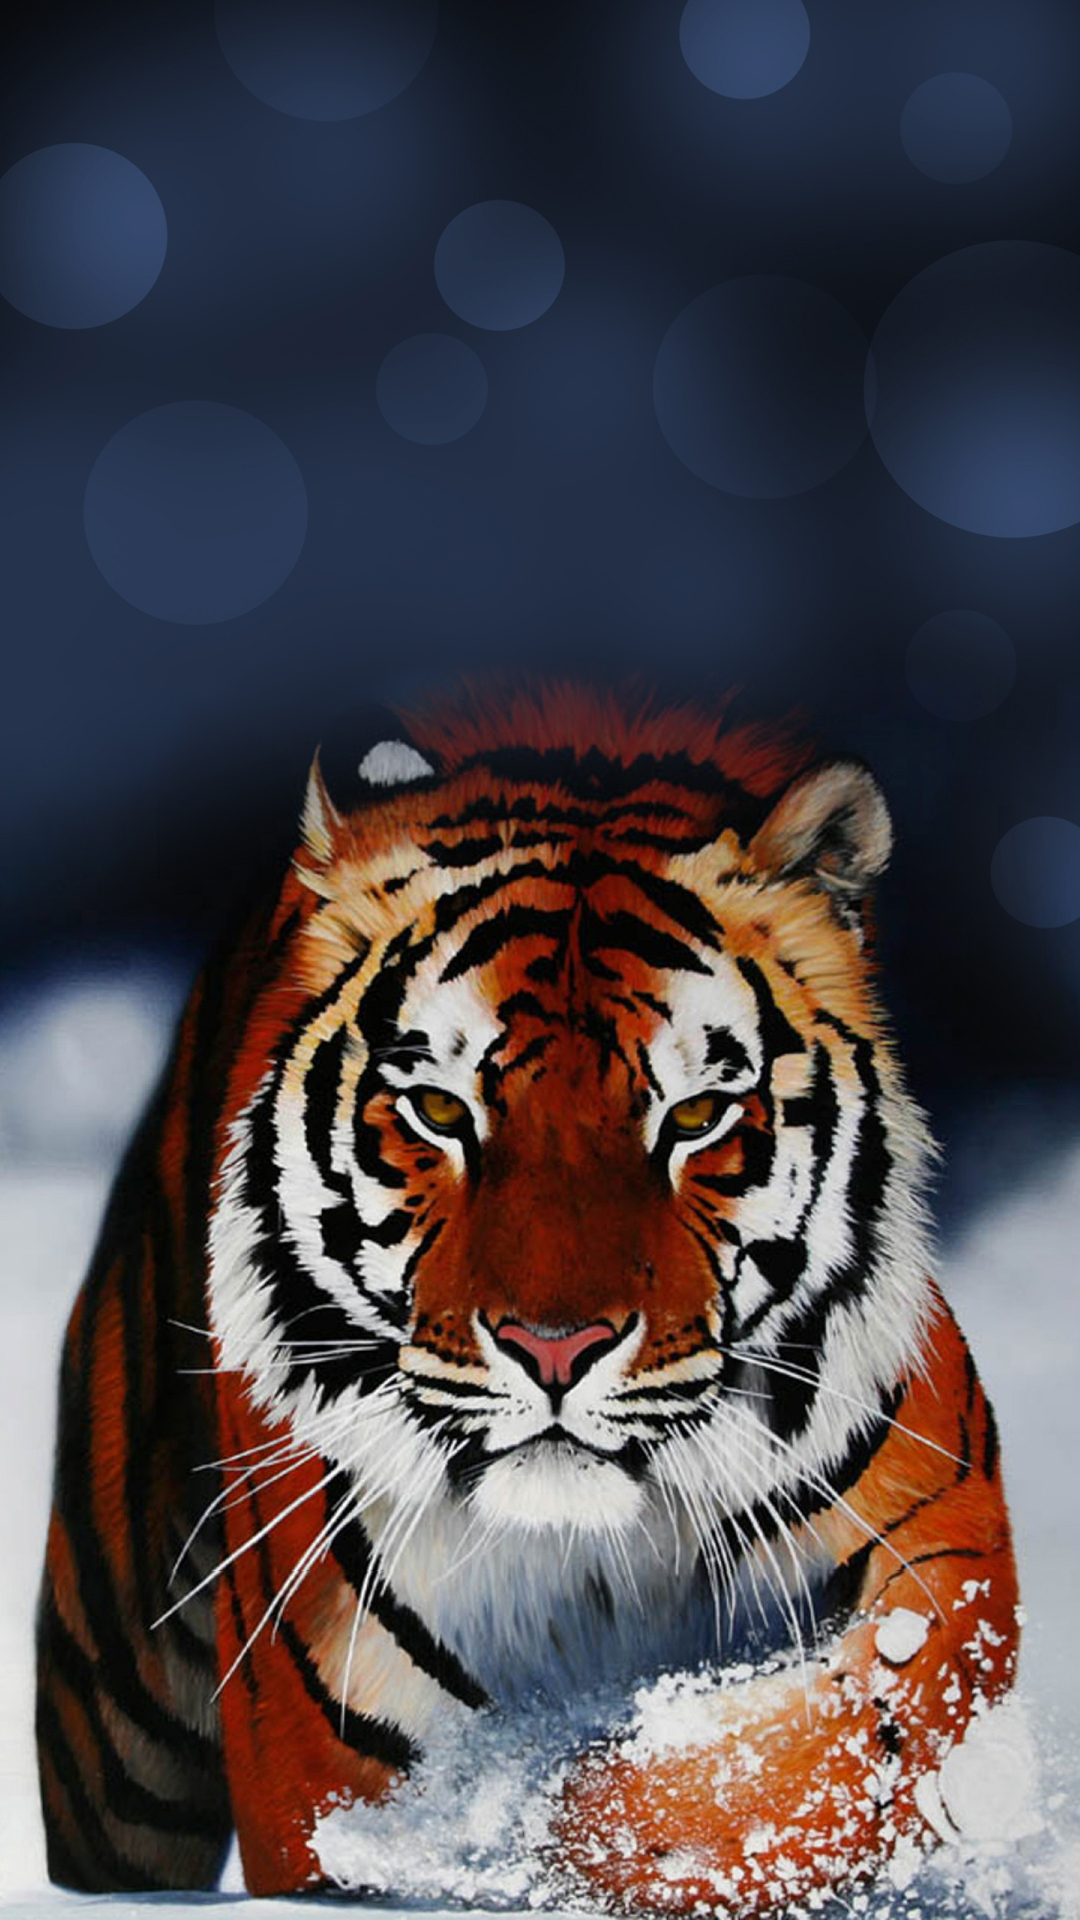 Tiger Wallpapers iPhone 6S Plus by mrjok2016 on DeviantArt